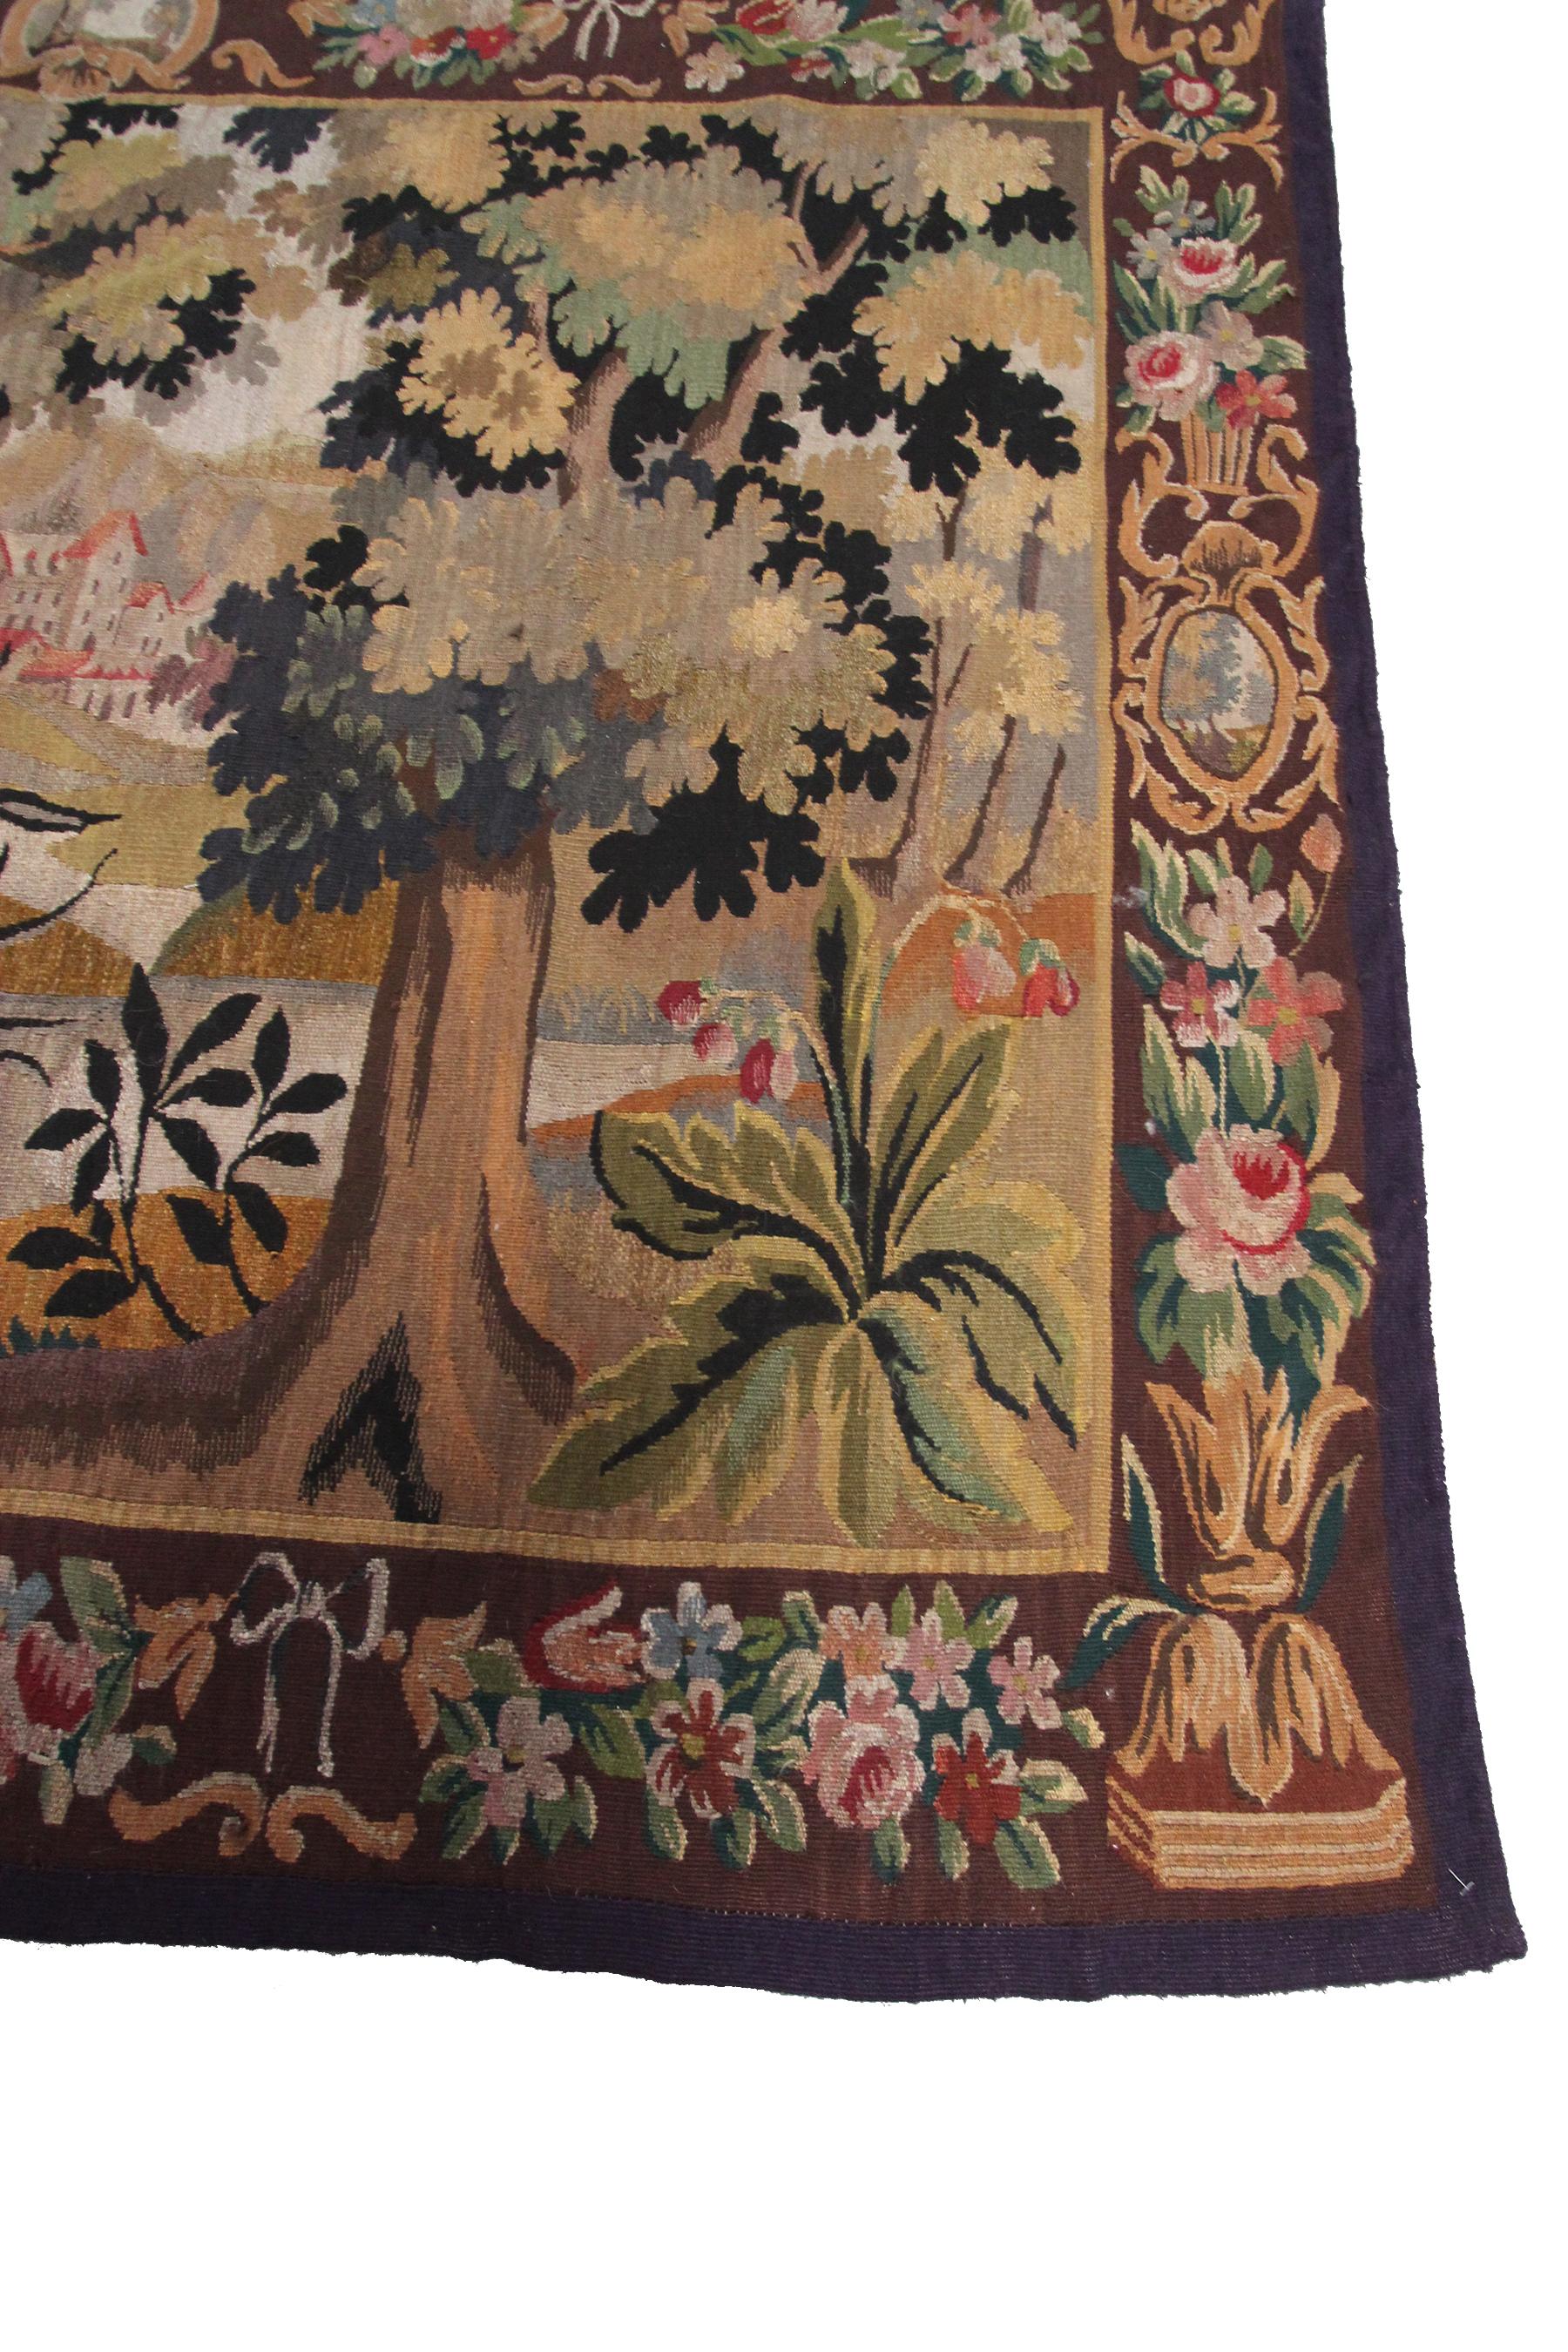 Wool Antique Tapestry Verdure Tapestry Large Handmade French Tapestry 5X7, 1900 For Sale